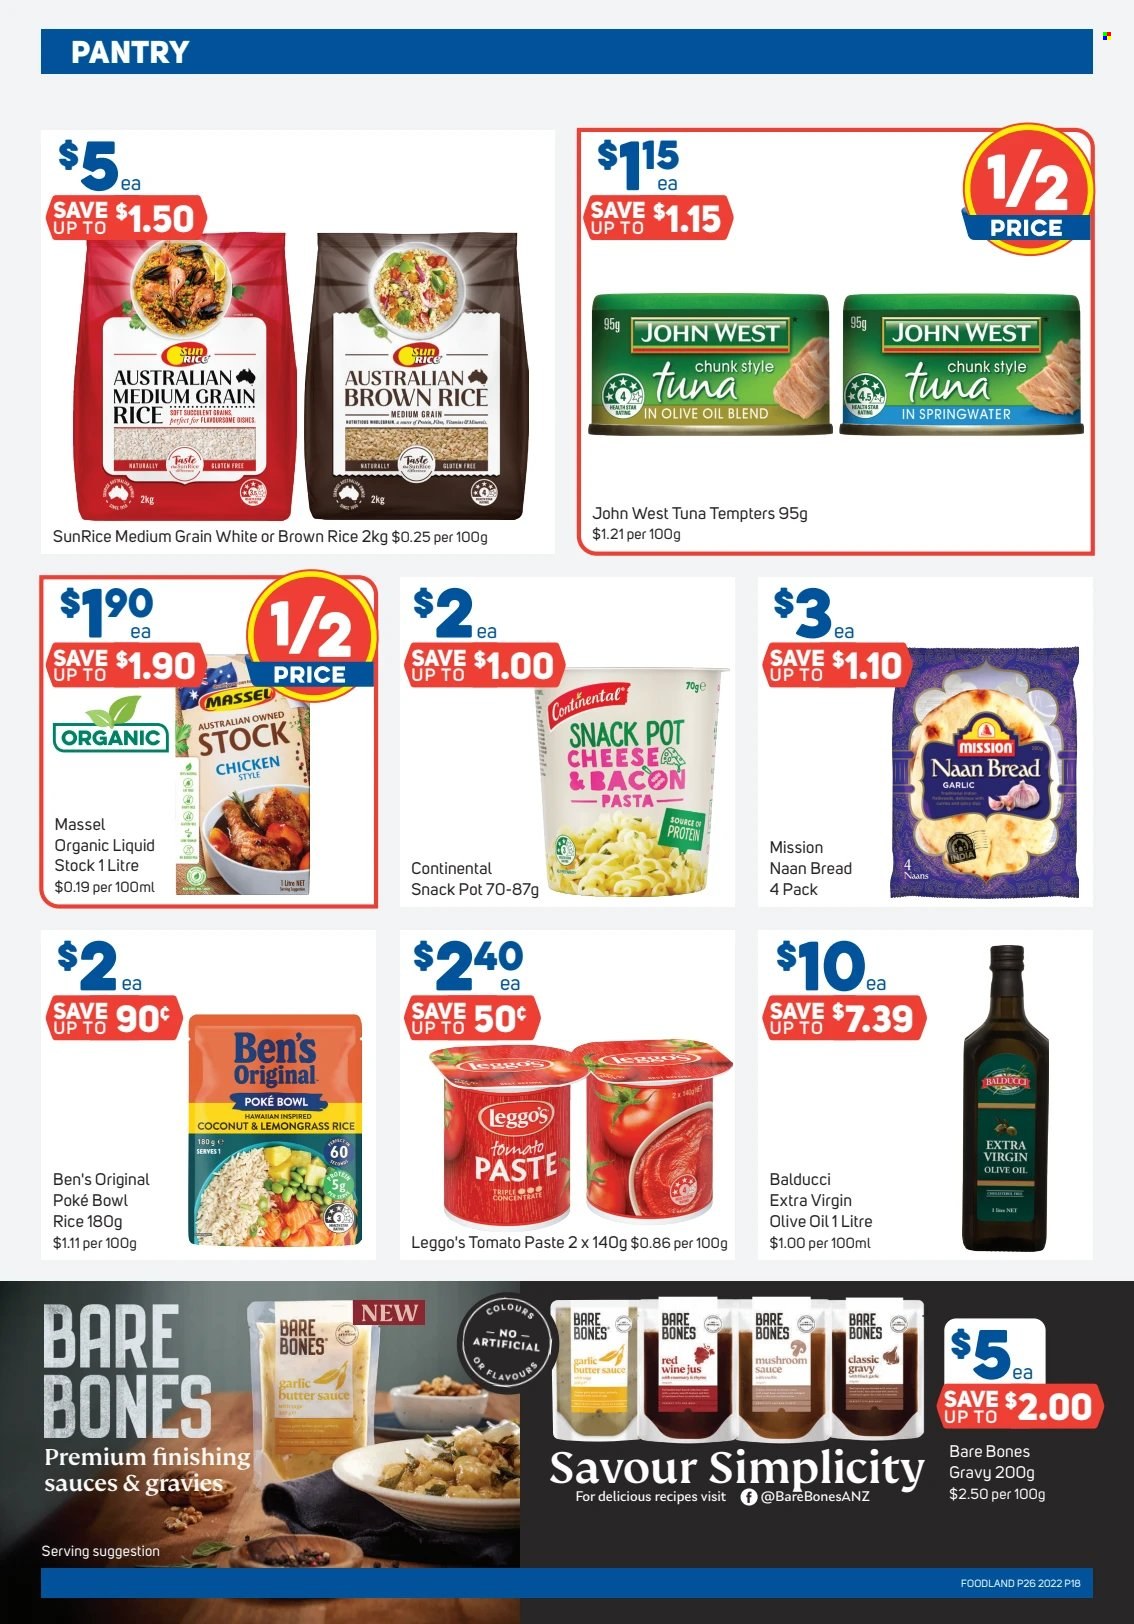 thumbnail - Foodland Catalogue - 29 Jun 2022 - 5 Jul 2022 - Sales products - bread, tuna, pasta, Continental, bacon, butter, snack, tomato paste, brown rice, rice, medium grain rice, extra virgin olive oil, bowl. Page 18.